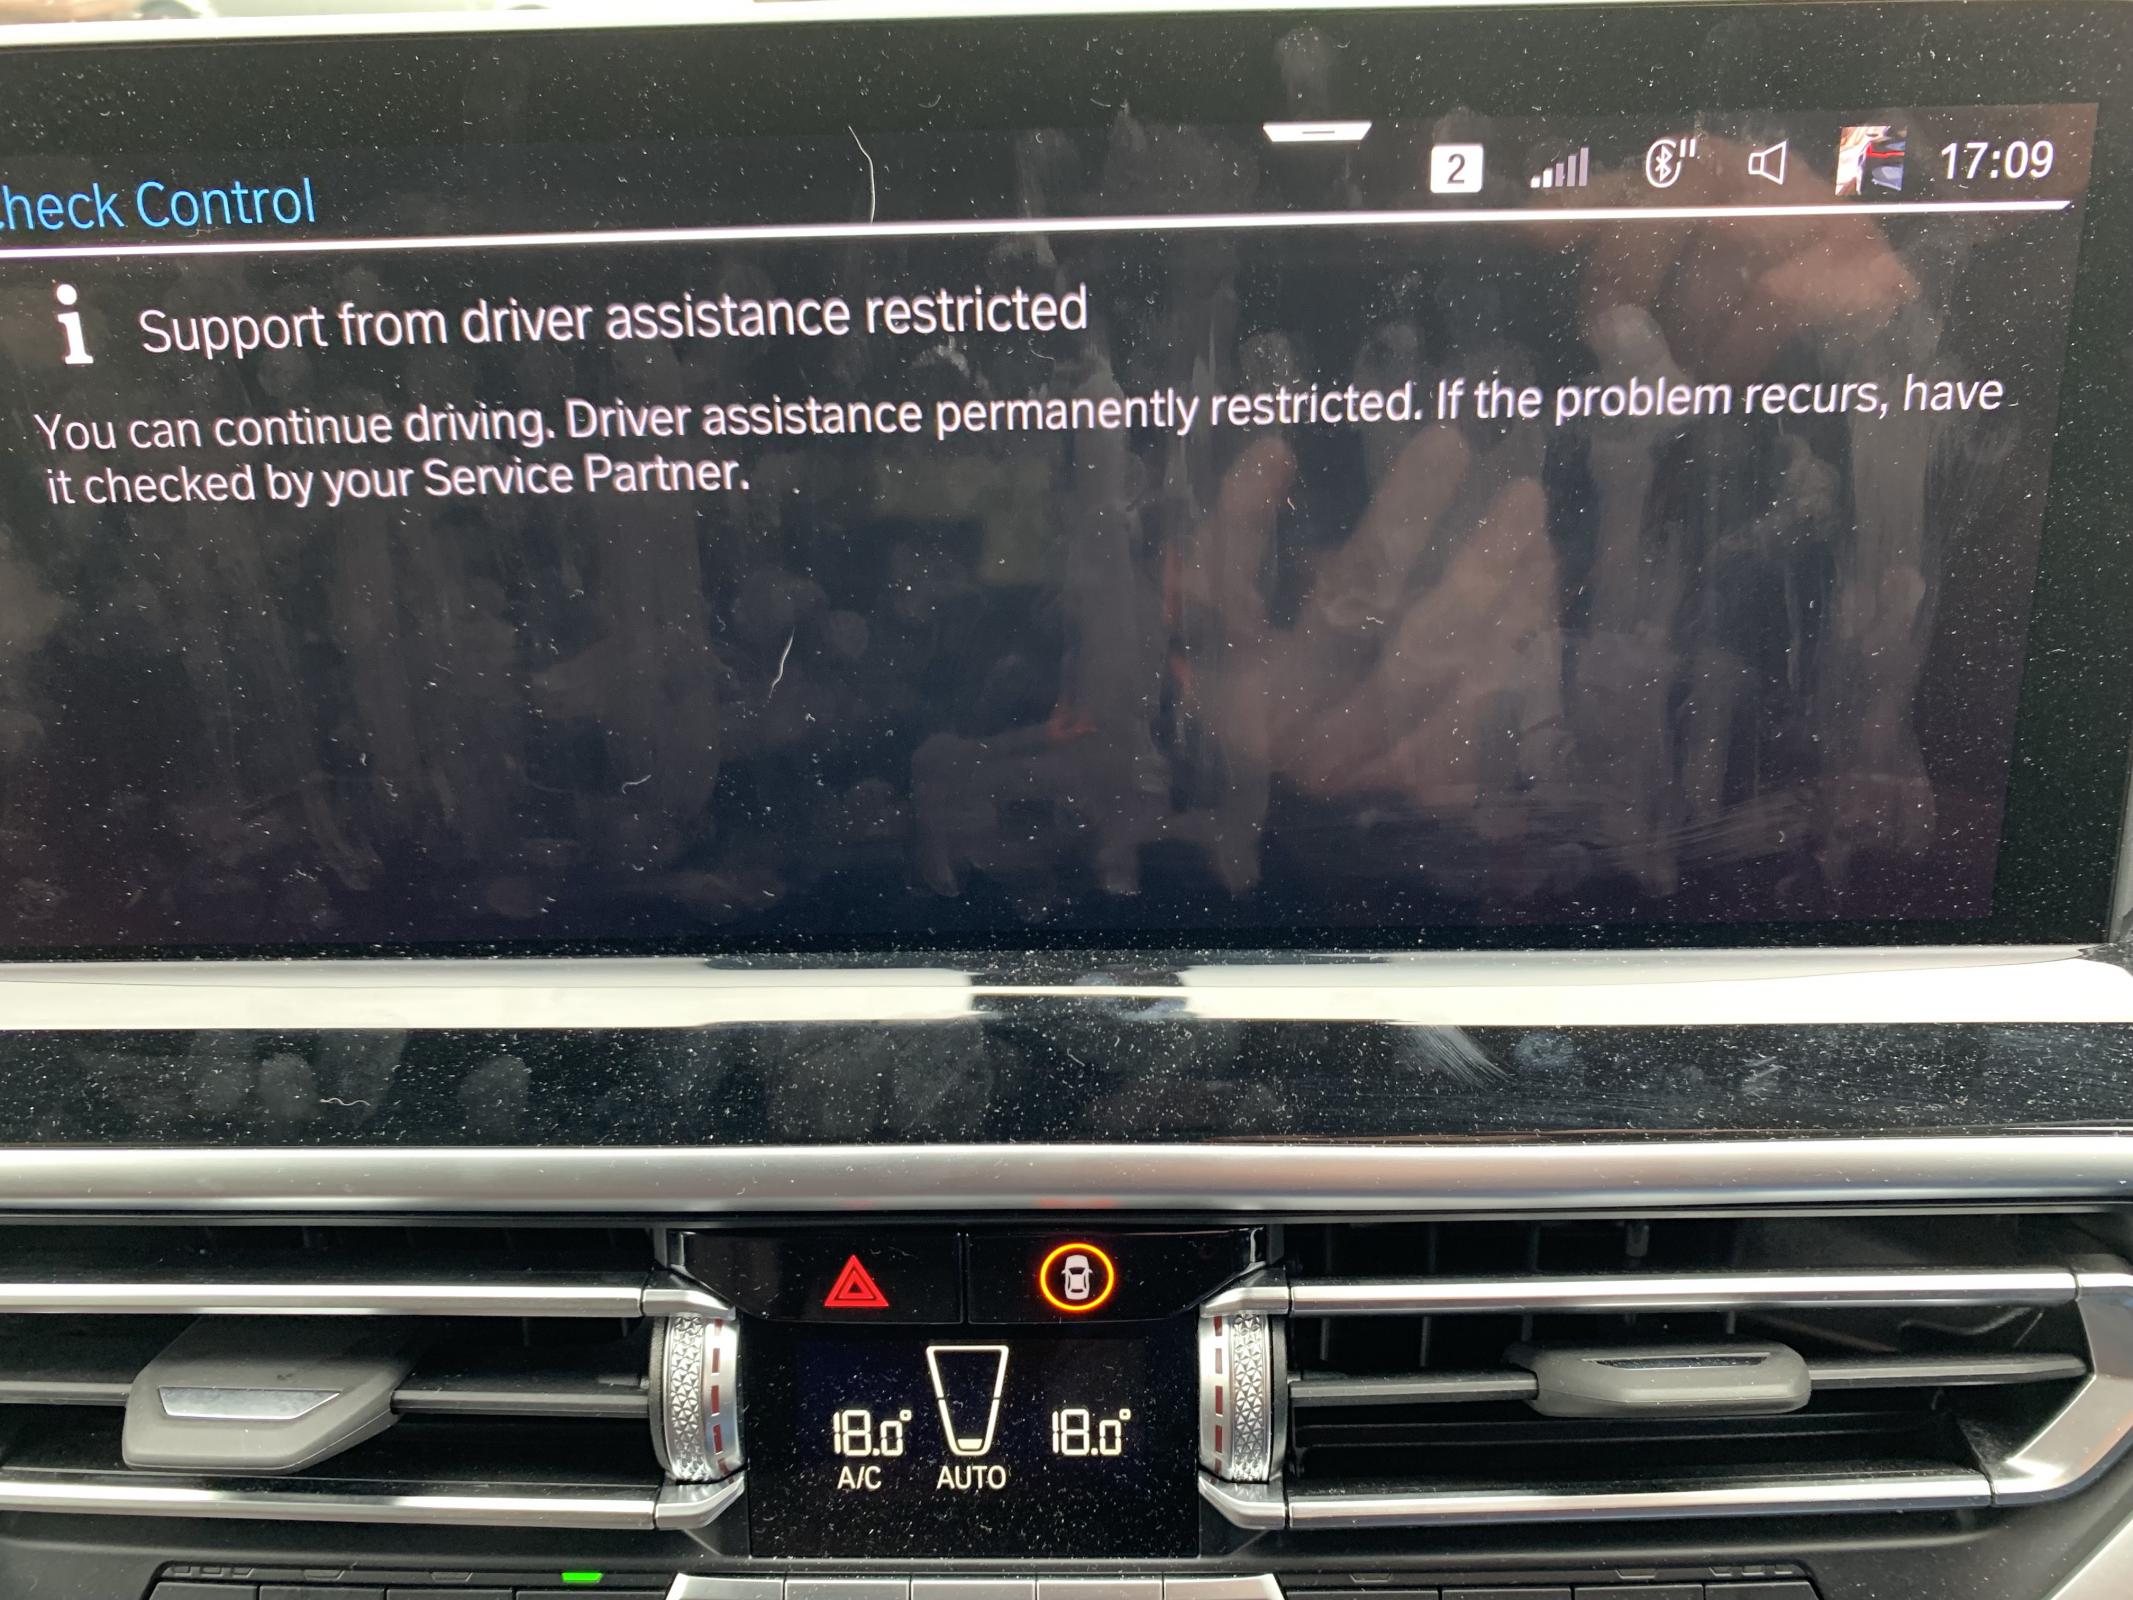 Resolve Camera Failure and Keep Driver Assistance Systems Turned On in iX50 with Latest Software Update